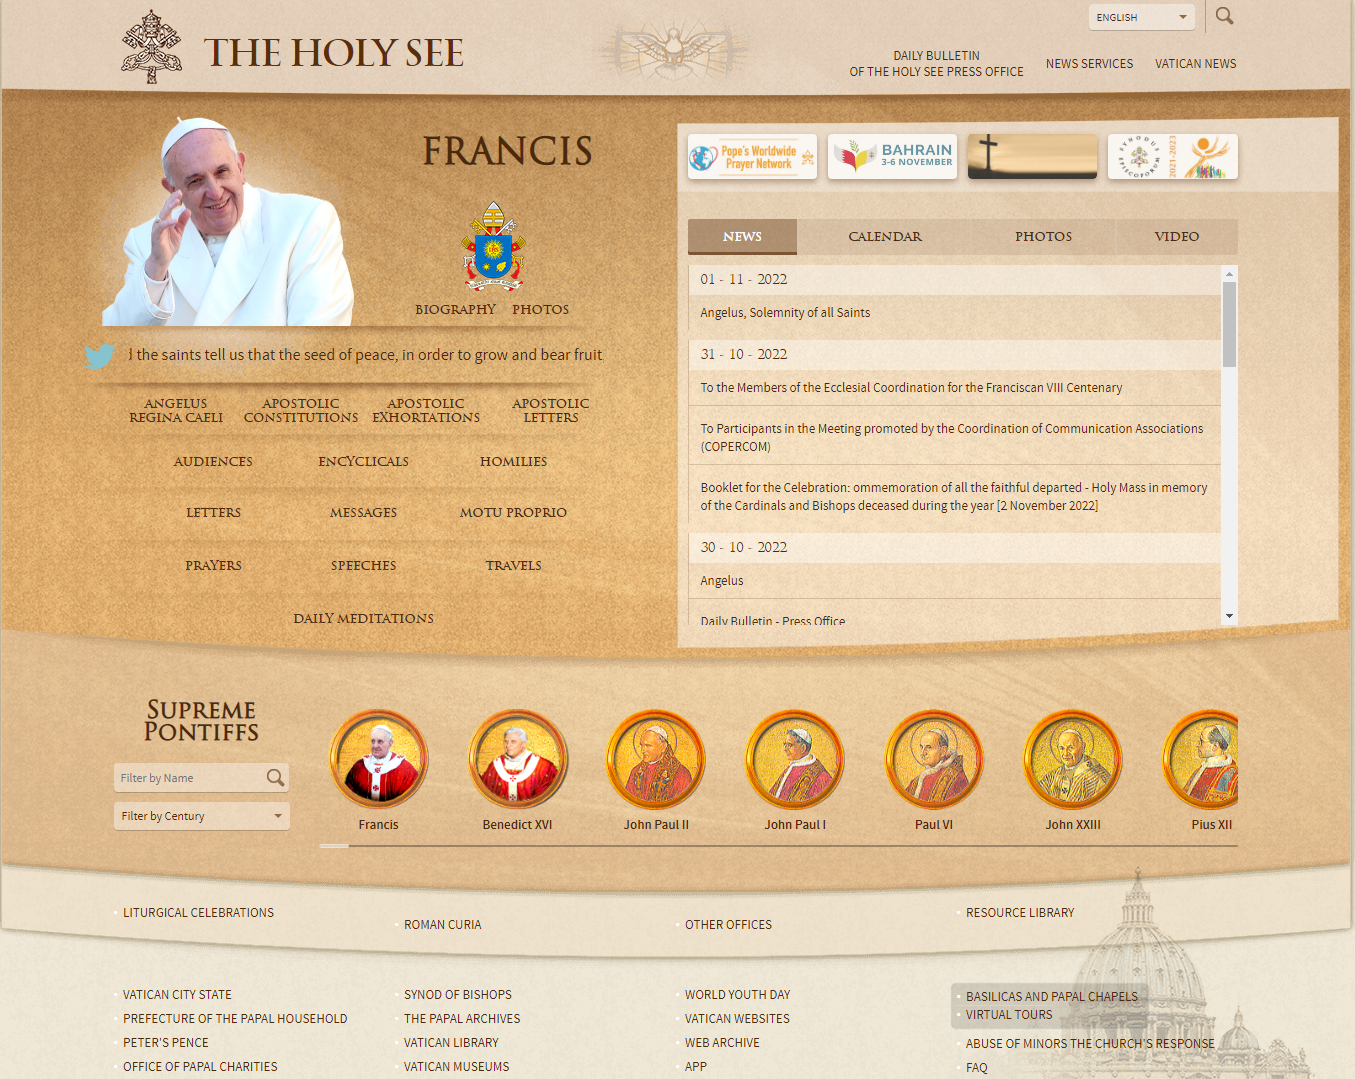 Please click here to visit the Vatican website